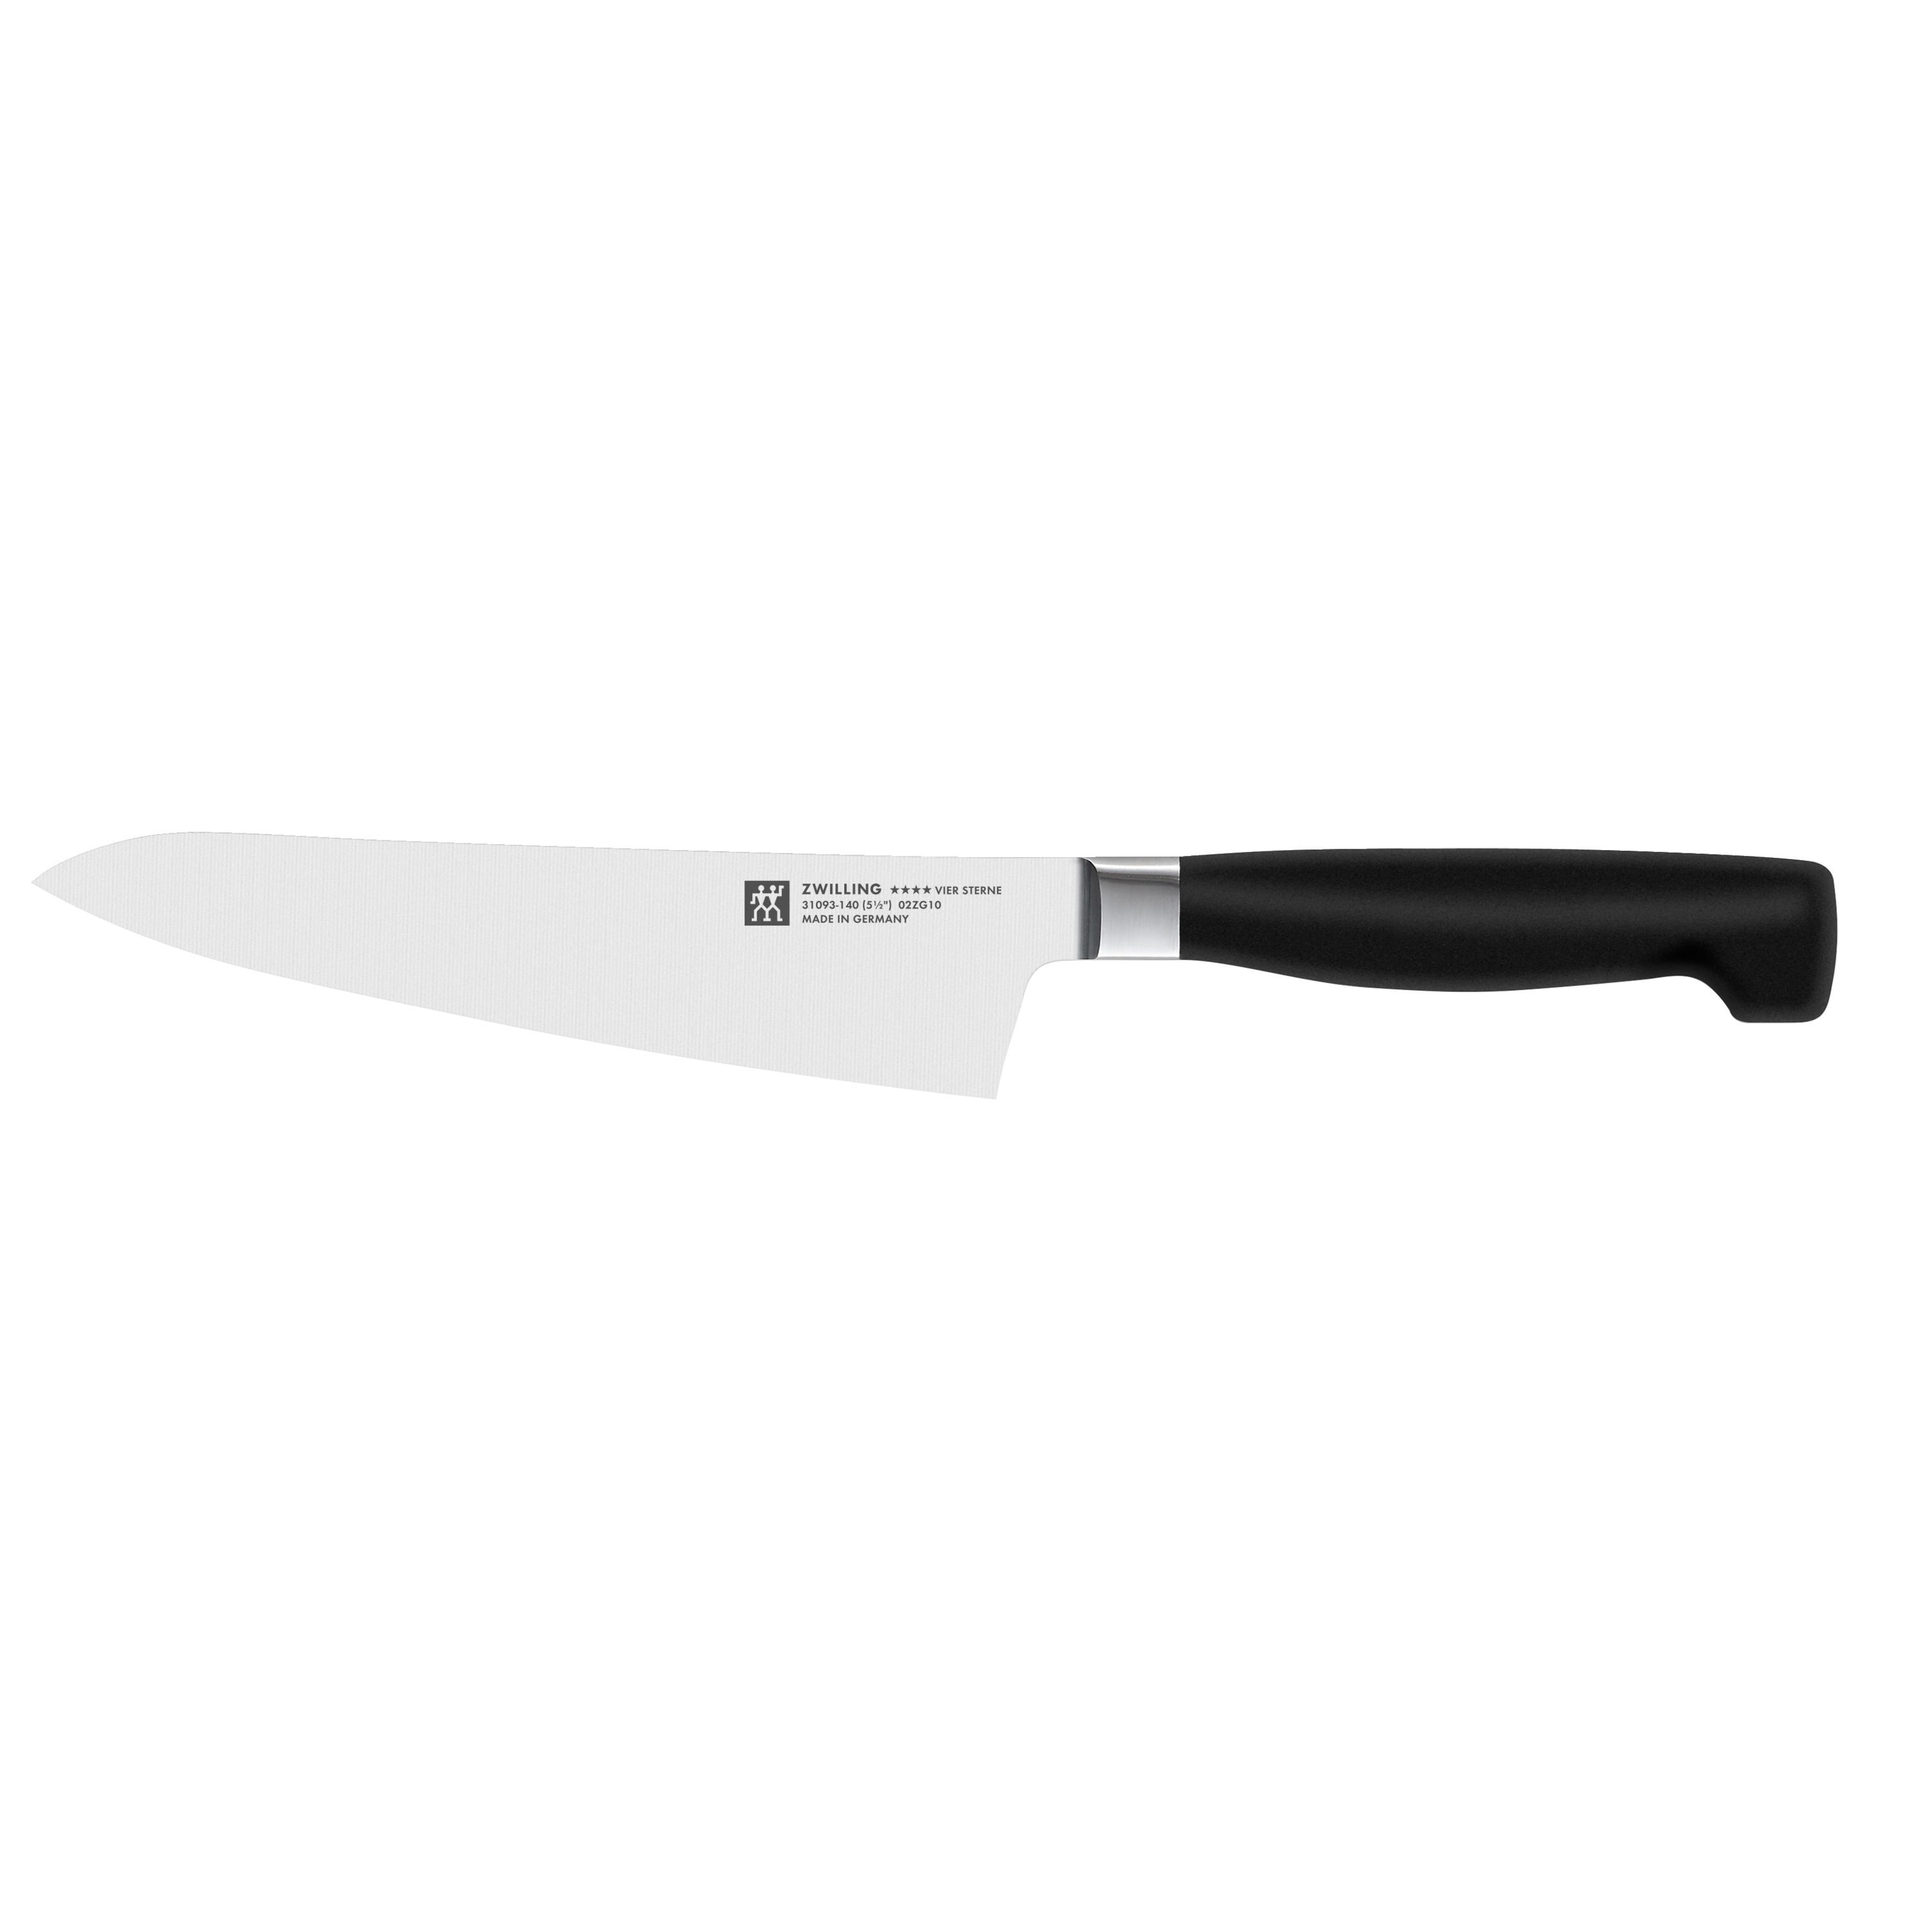 ZWILLING since 1731 - German Home Kitchen Products | ZWILLING.COM